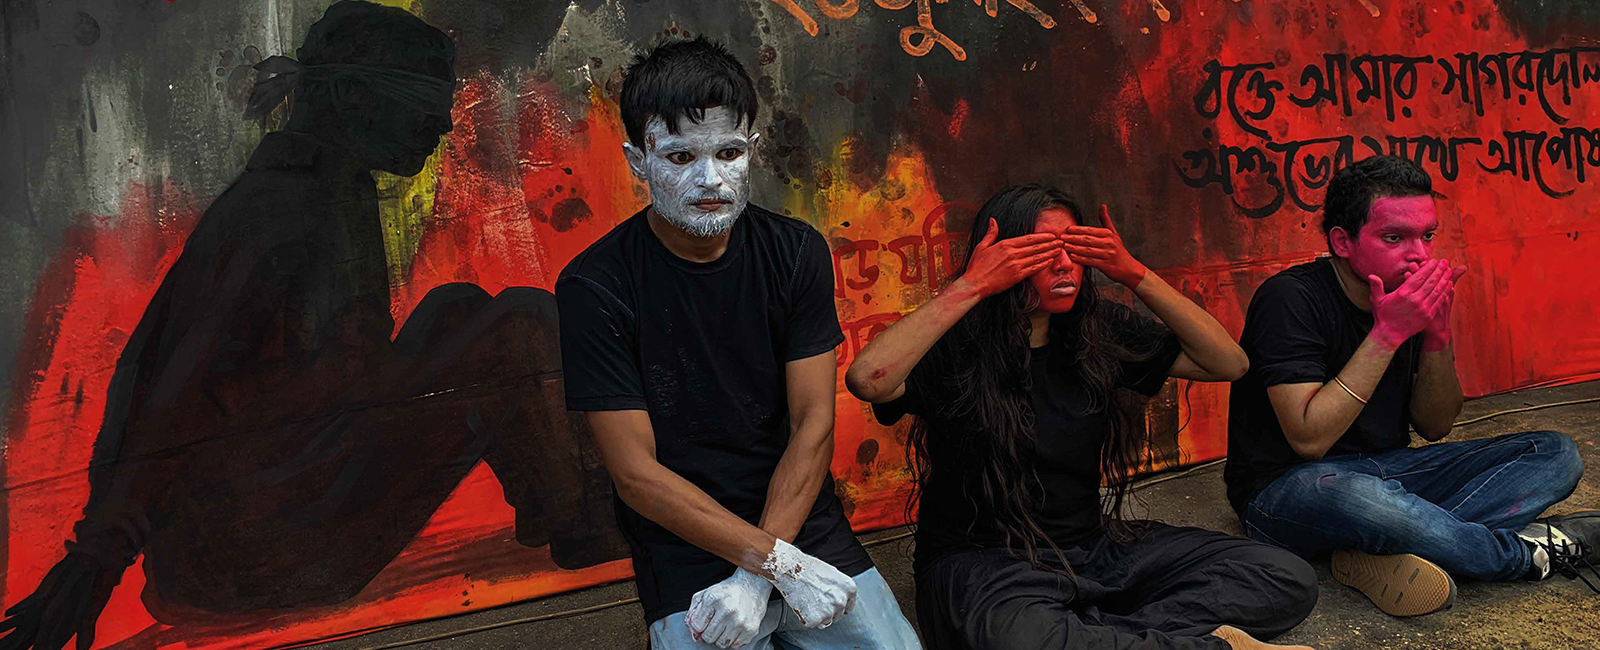 Three people sit in front of a red and orange mural with text and the silhouette of a figure sitting, gagged and hands bound. The three people in the picture have painted their hands and faces in white, orange, and pink.